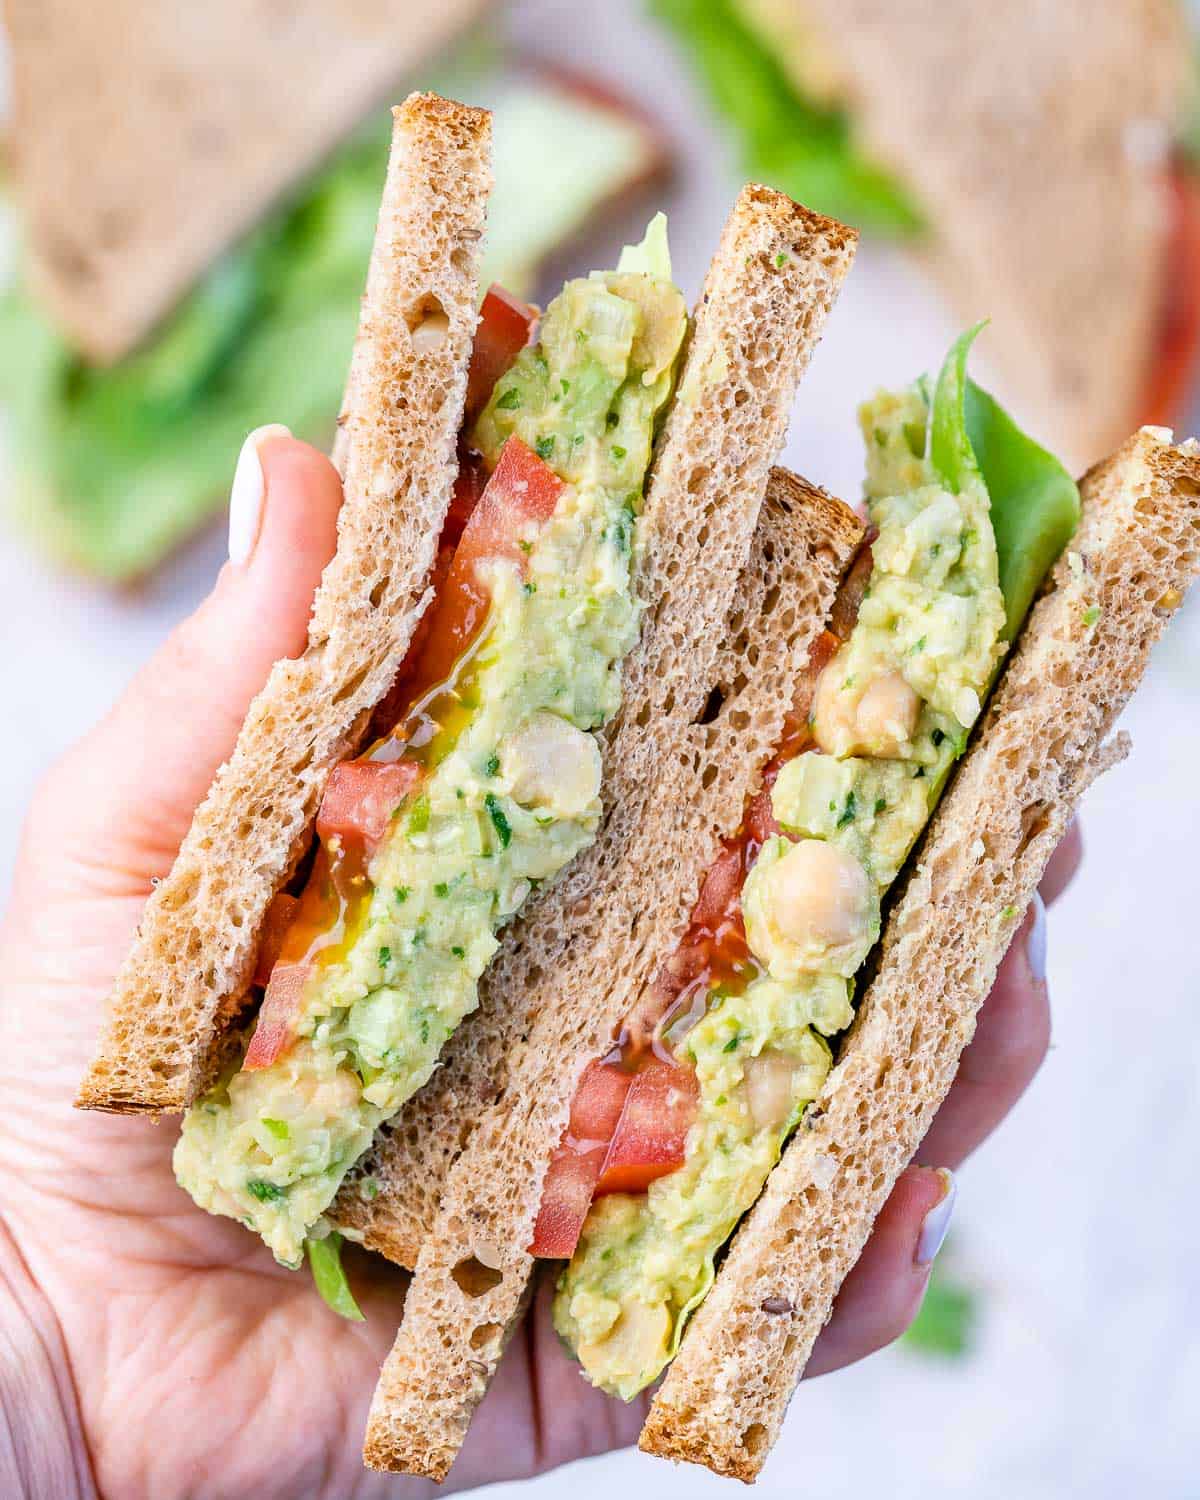 top view of avocado chickpea sandwich with tomato on bread slices